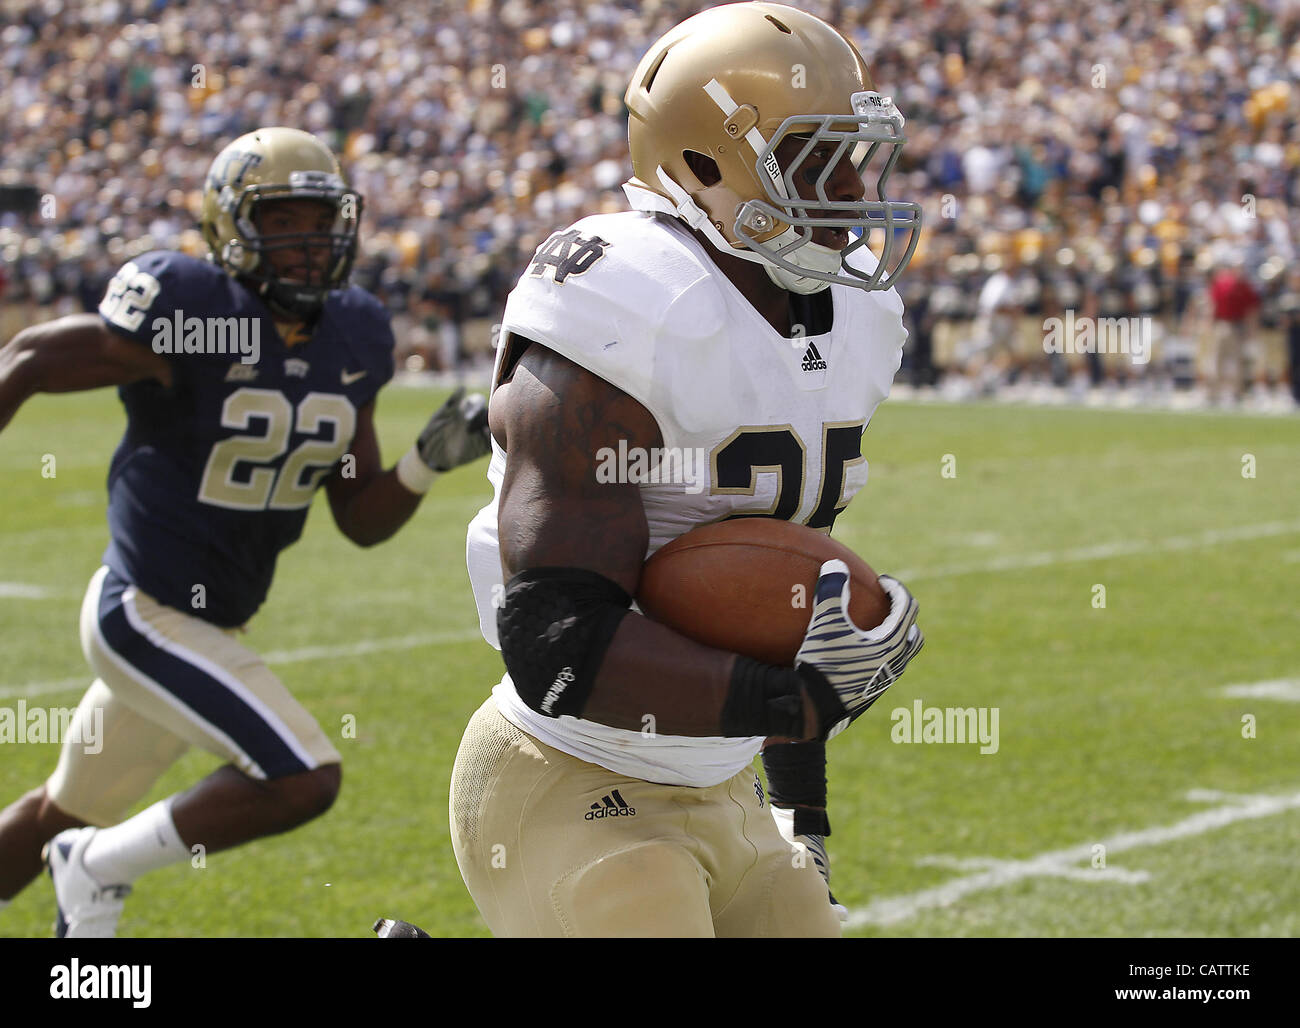 Sept. 24, 2011 - Pittsburgh, Pennsylvania, USA - Notre Dame Fighting Irish running back Jonas Gray (25). The Notre Dame Fighting Irish were able to hold onto a slight lead to beat the University of Pittsburgh Panthers in Hienz Field.  Photo By Aaron Suozzi (Credit Image: © Aaron Souzzi/ZUMAPRESS.com Stock Photo